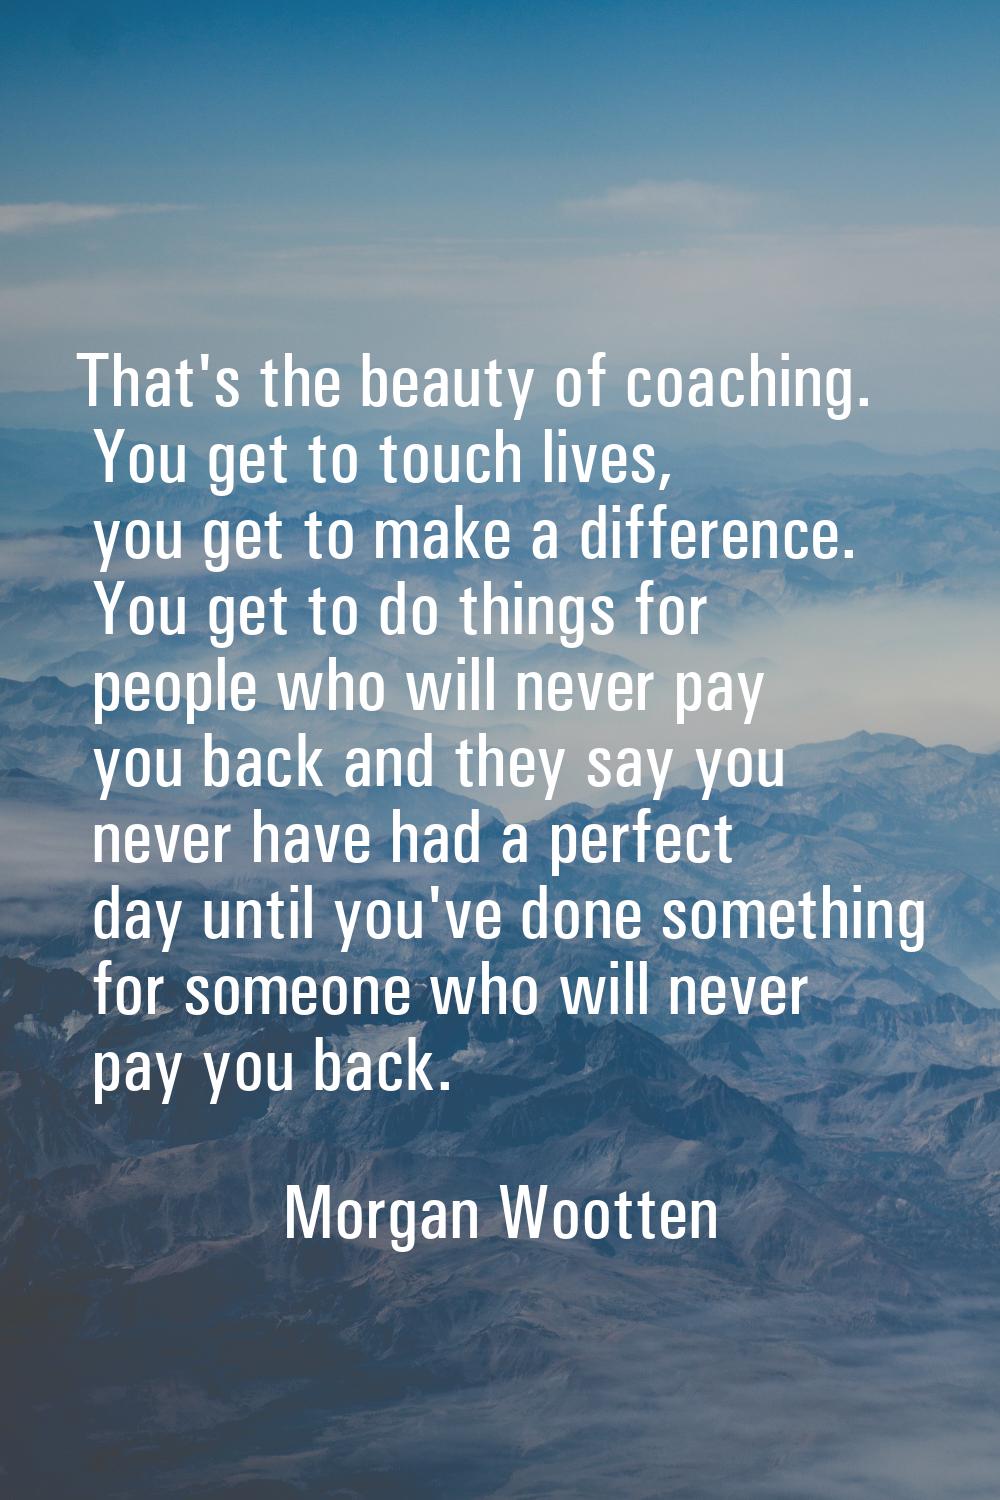 That's the beauty of coaching. You get to touch lives, you get to make a difference. You get to do 